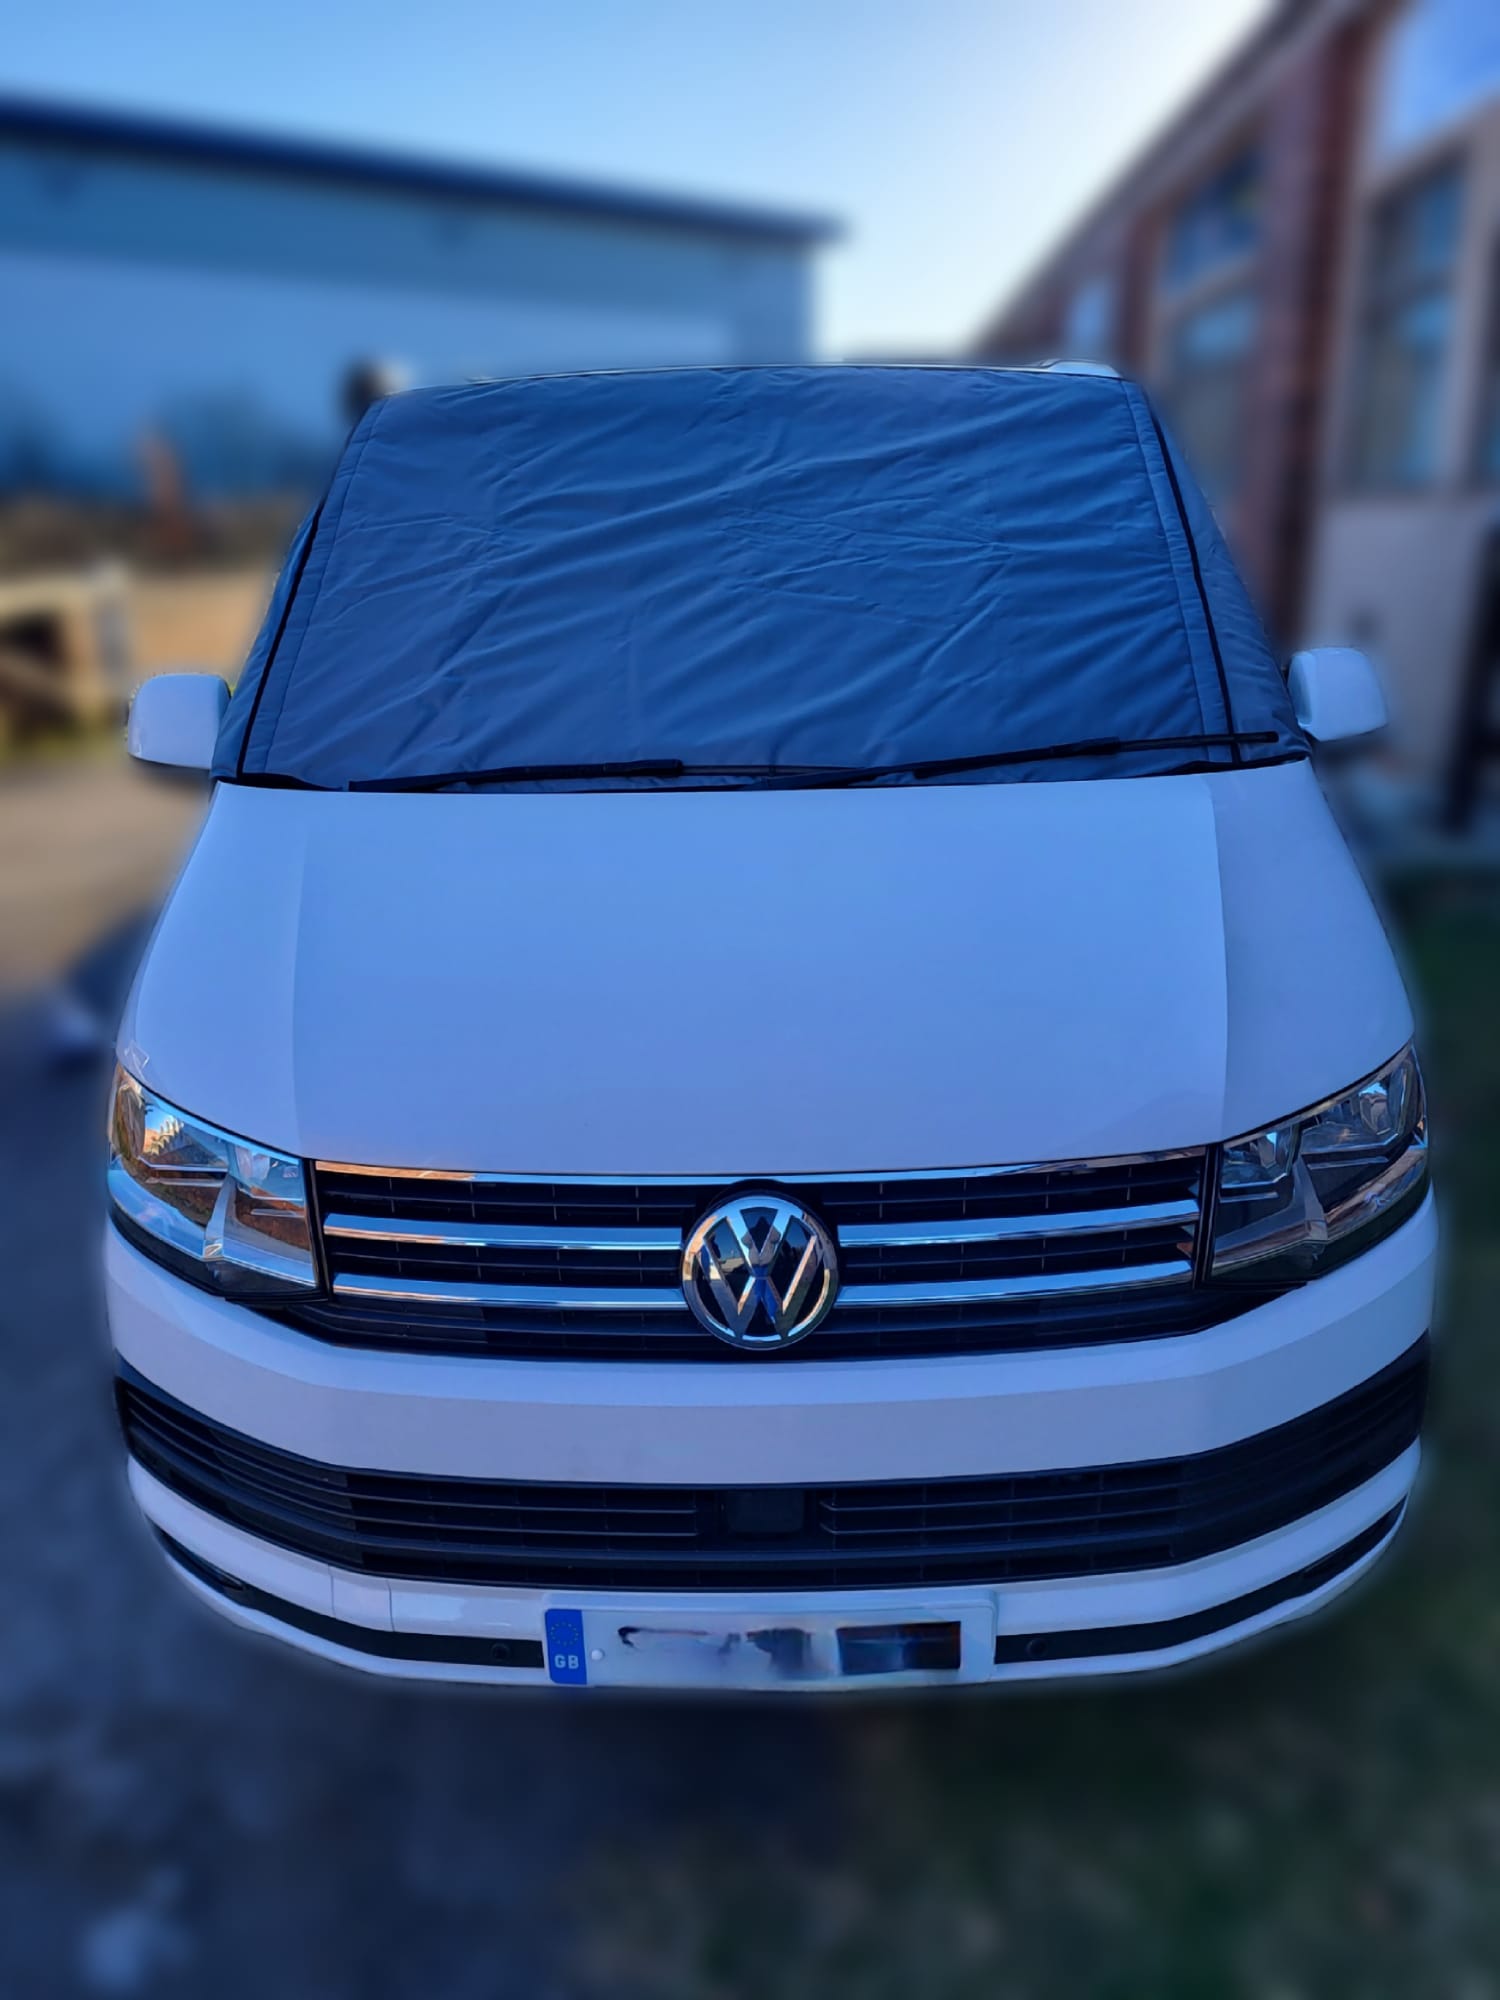 For Deluxe VW T5 T6 Window Screen Cover Curtain Wrap Blind Camping Frost